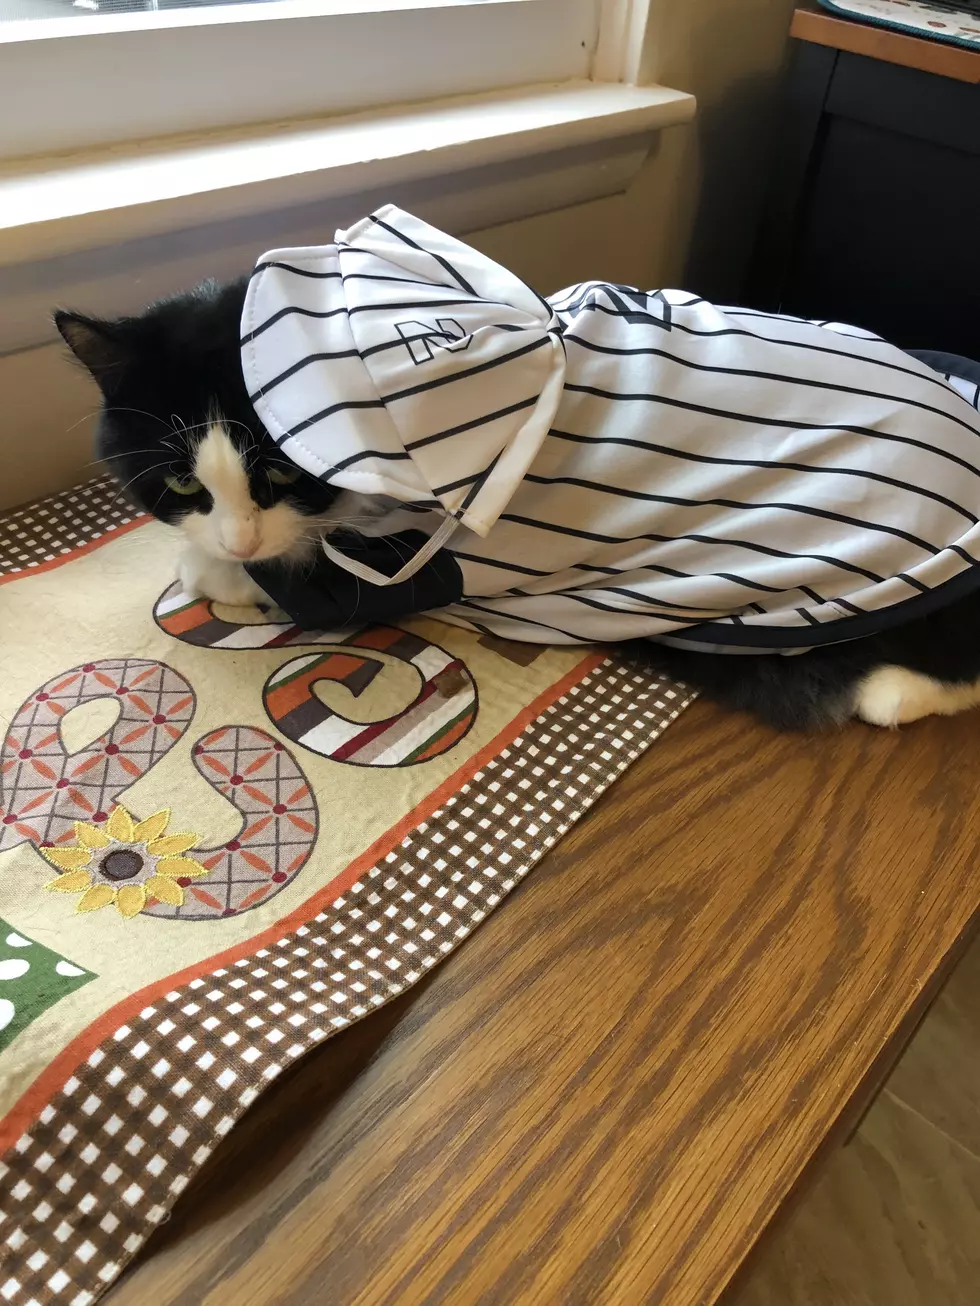 Guilty As Charged: I Dressed Up the Cat for Halloween